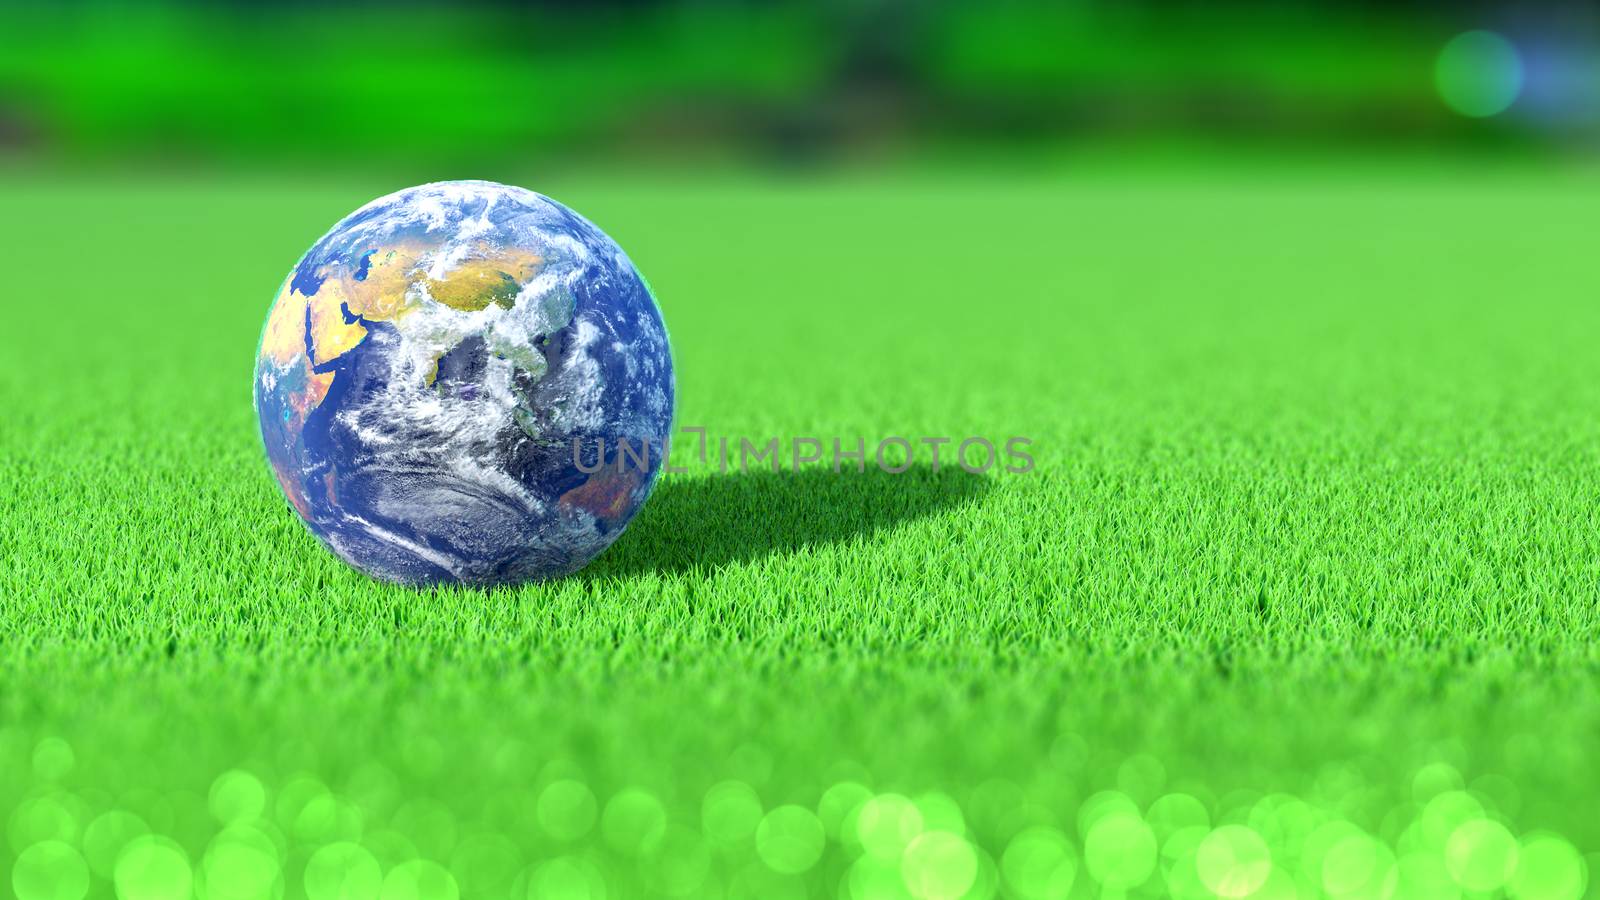 Planet Earth on the golf green course. India. Concept. 3D rendering. by ytjo